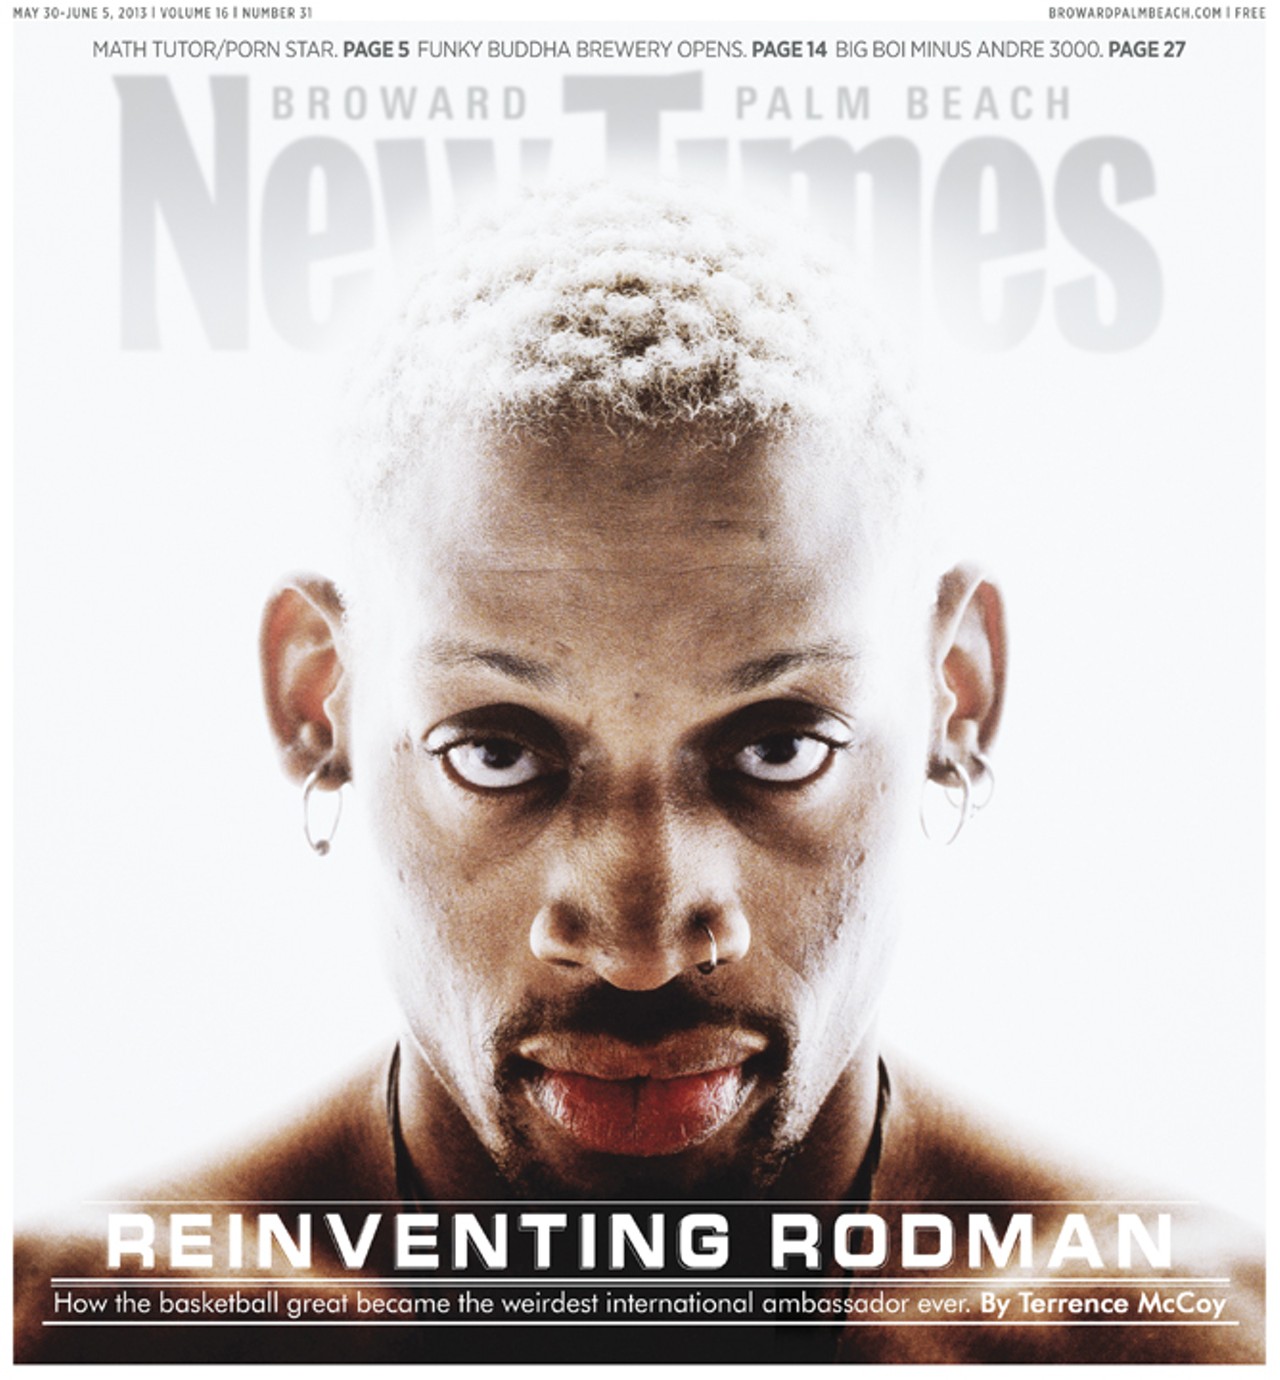 "Reinventing Rodman," by Terrence McCoy in the Broward-Palm Beach New Times.